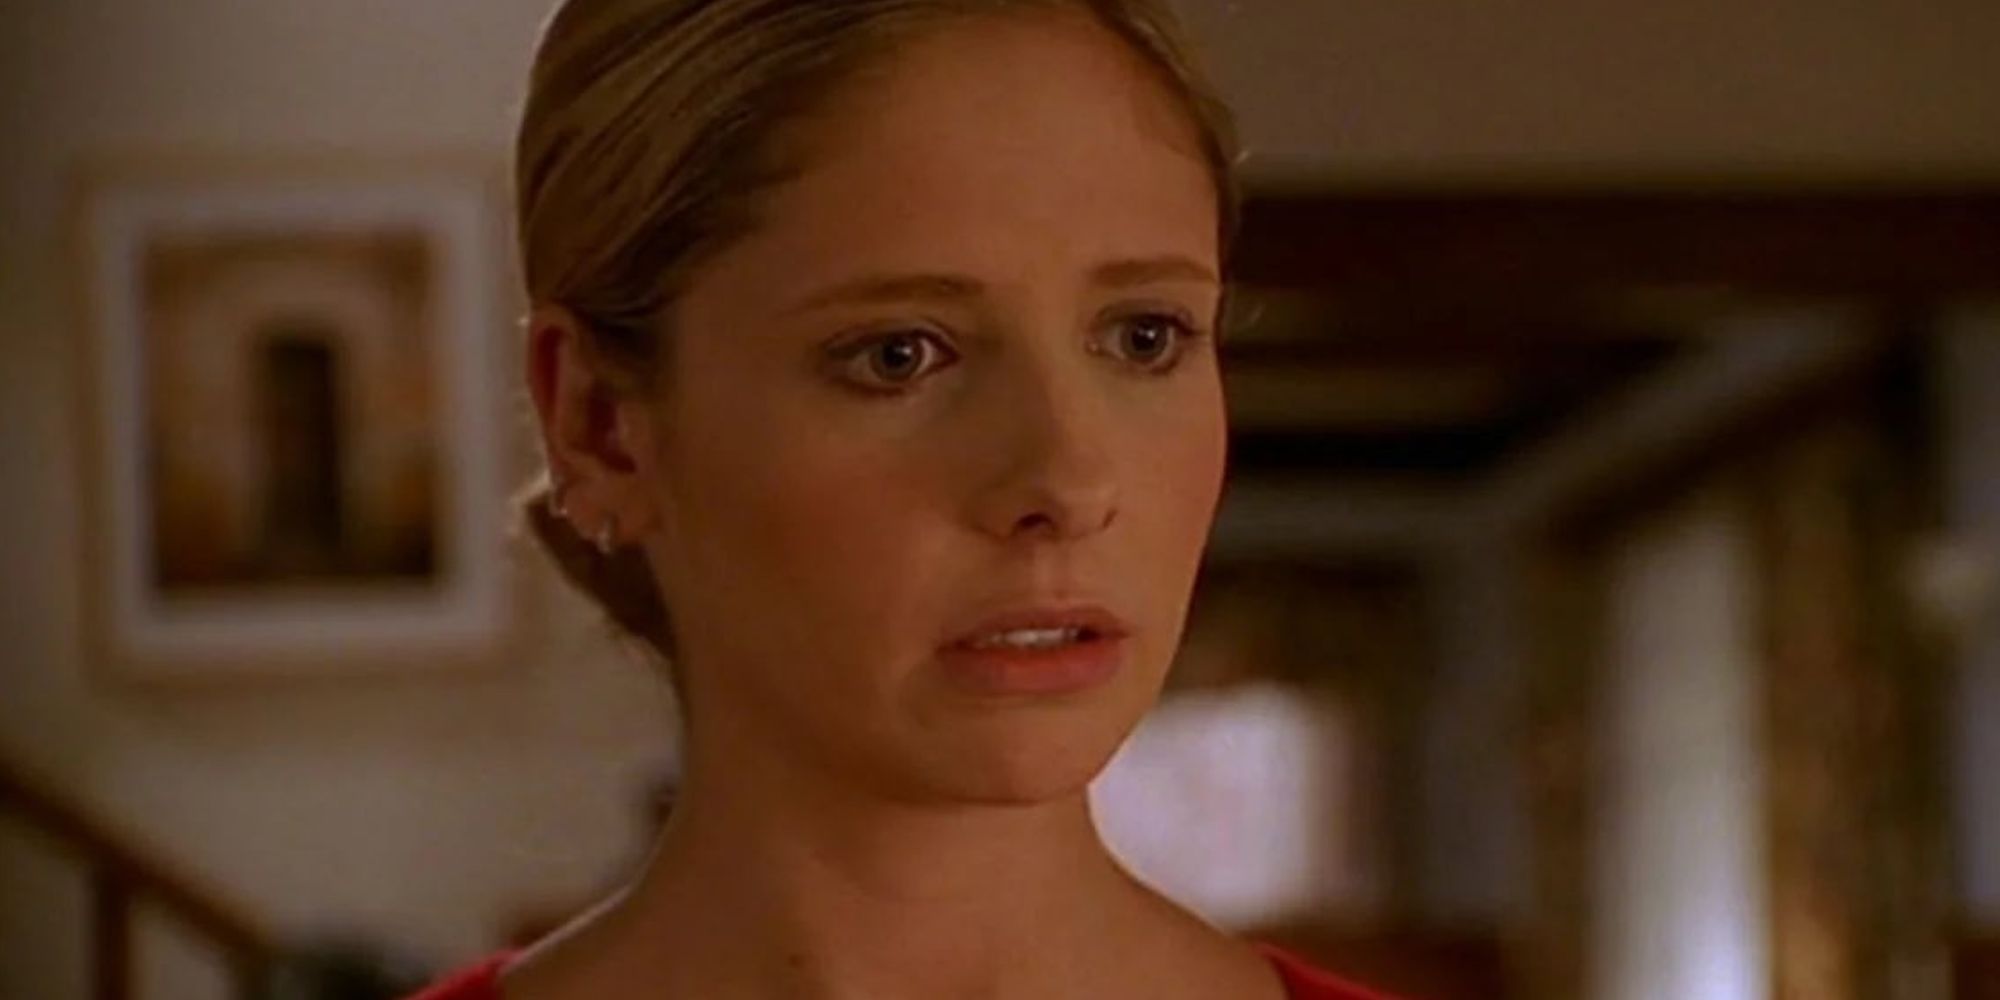 Sarah Michelle Gellar as Buffy looking quietly shocked in the episode The Body on Buffy the Vampire Slayer